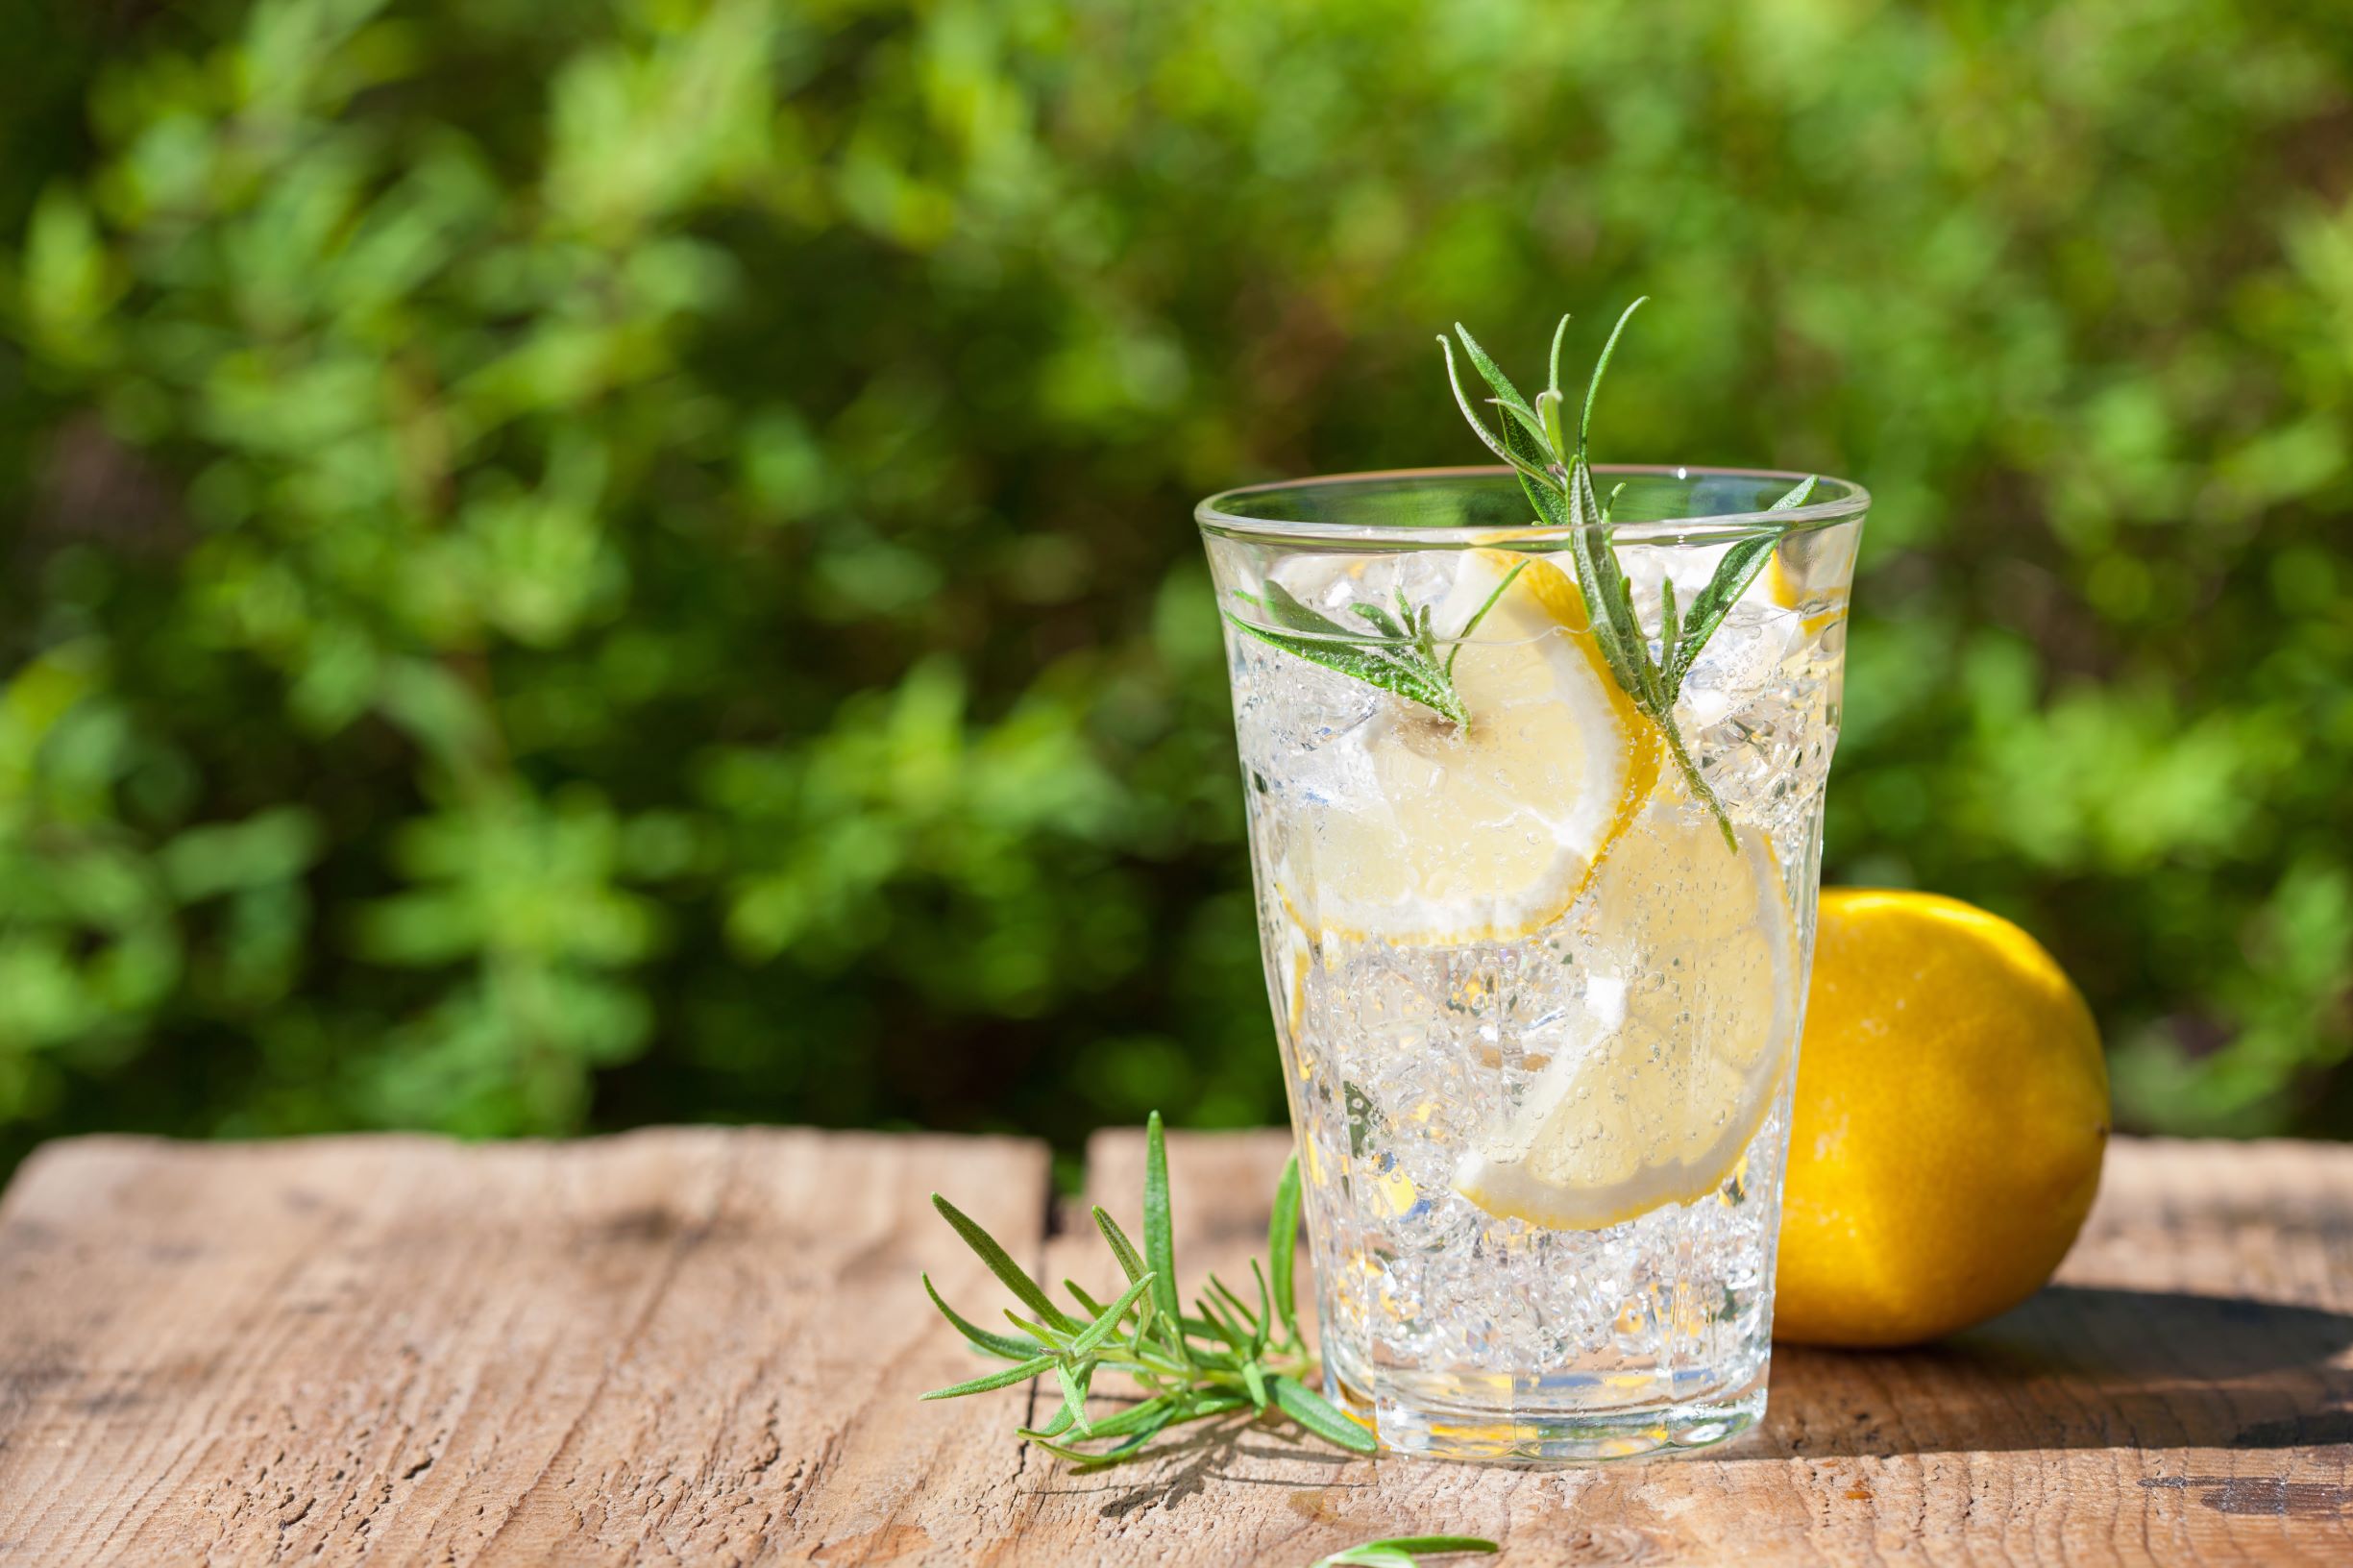 Refreshing lemon drink with herbs and a lemon on a wood table outside